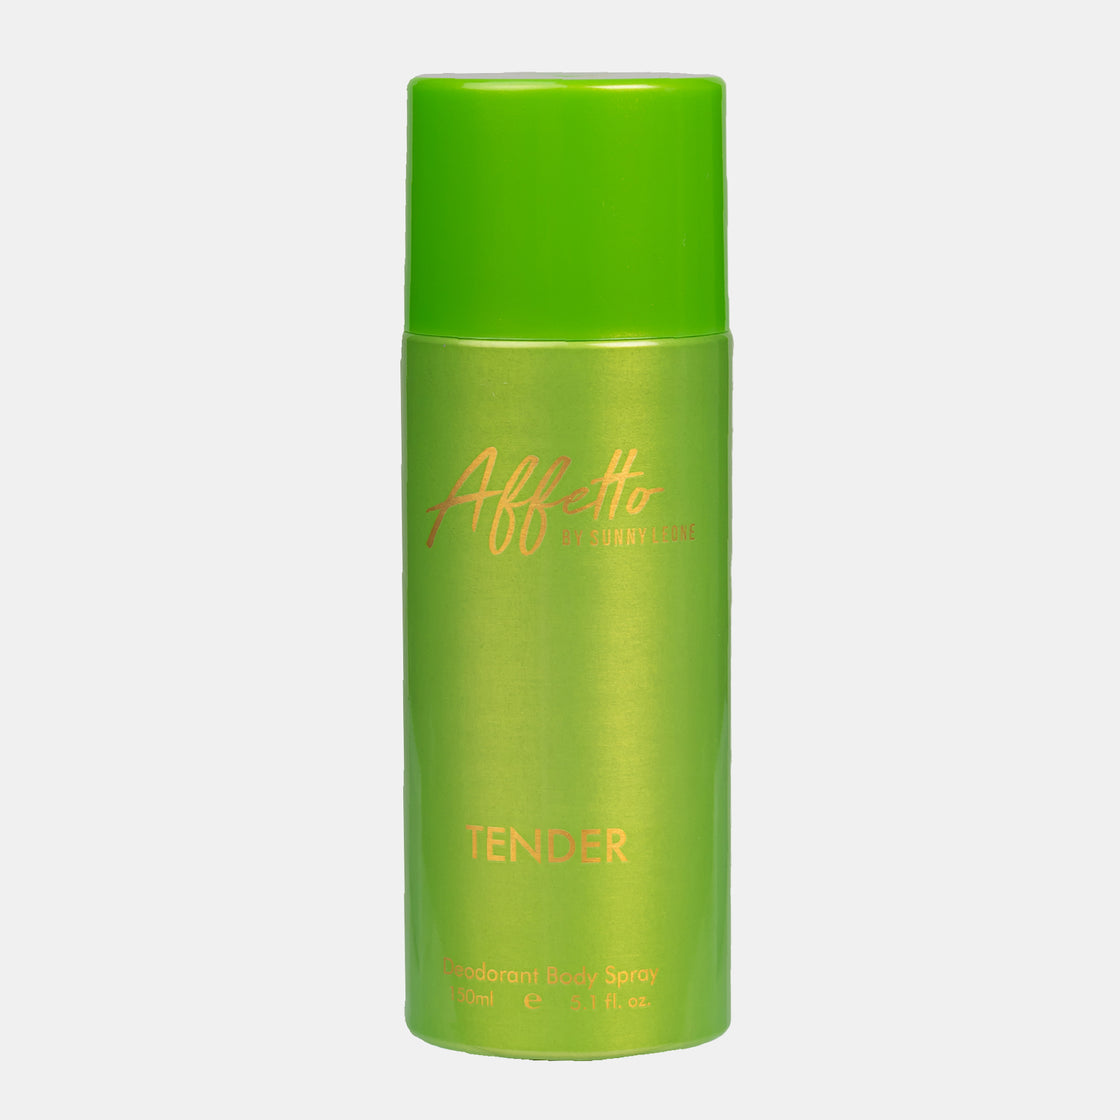 Tendero - For Her | Affetto By Sunny Leone - 150ml